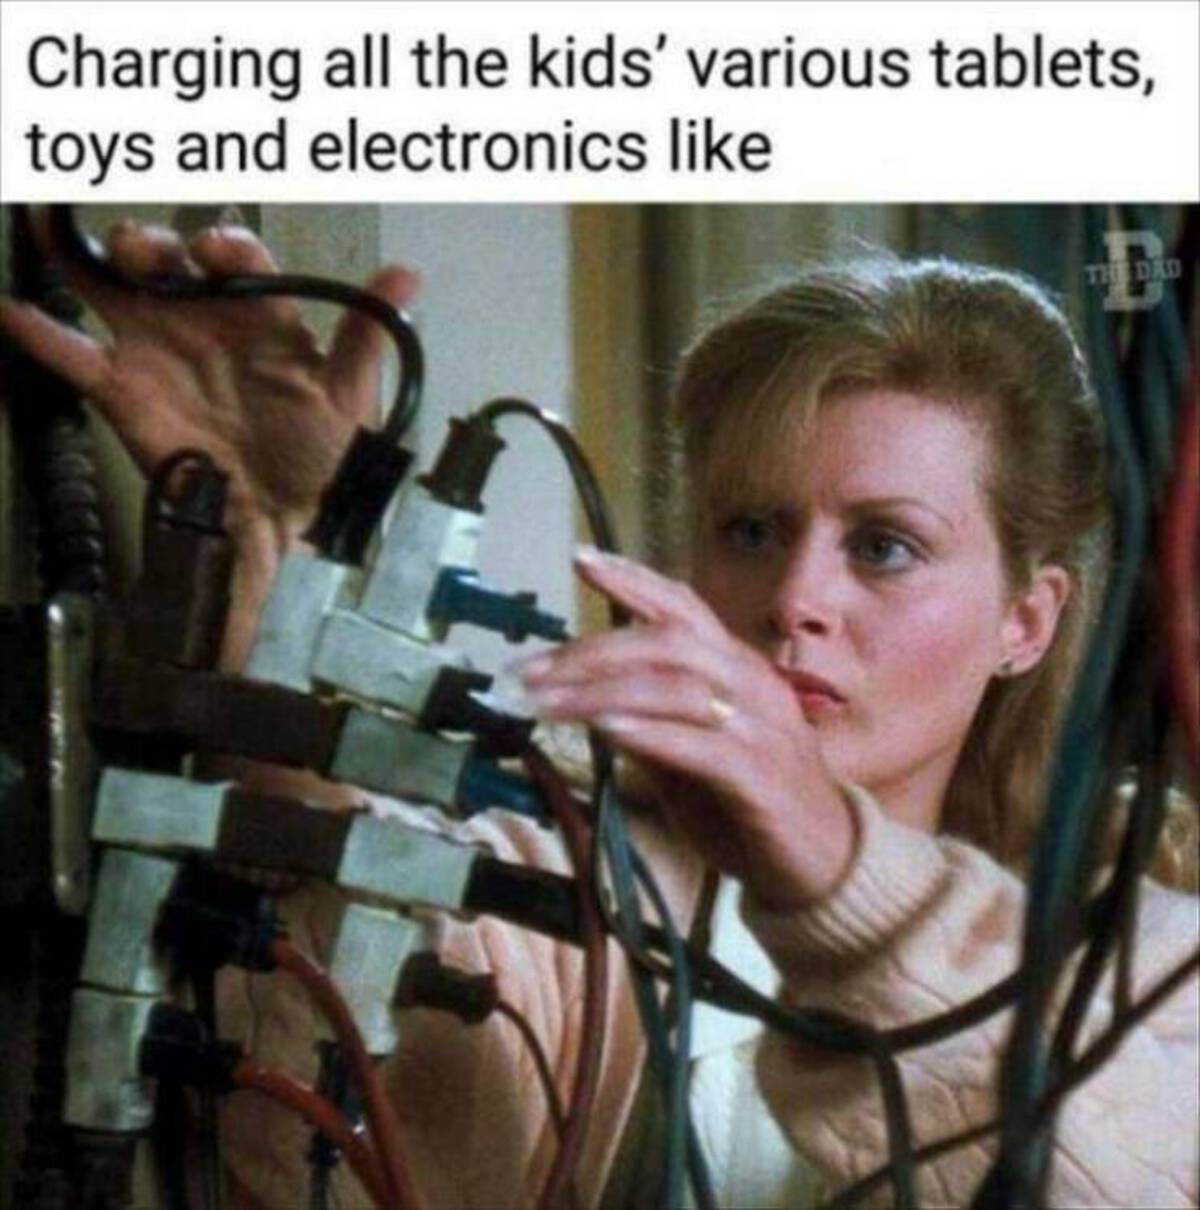 photo caption - Charging all the kids' various tablets, toys and electronics The Dad